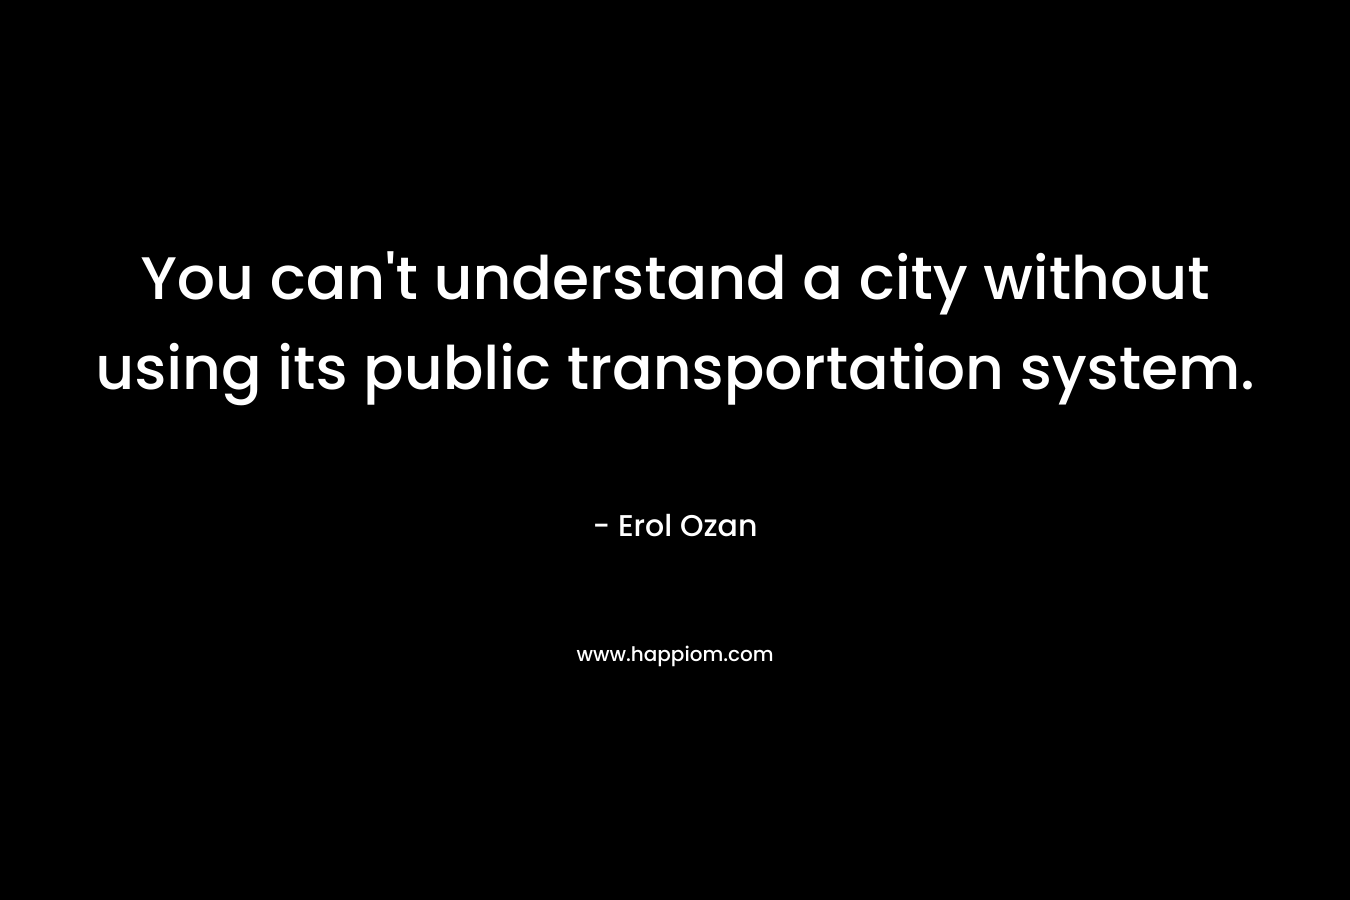 You can’t understand a city without using its public transportation system. – Erol Ozan